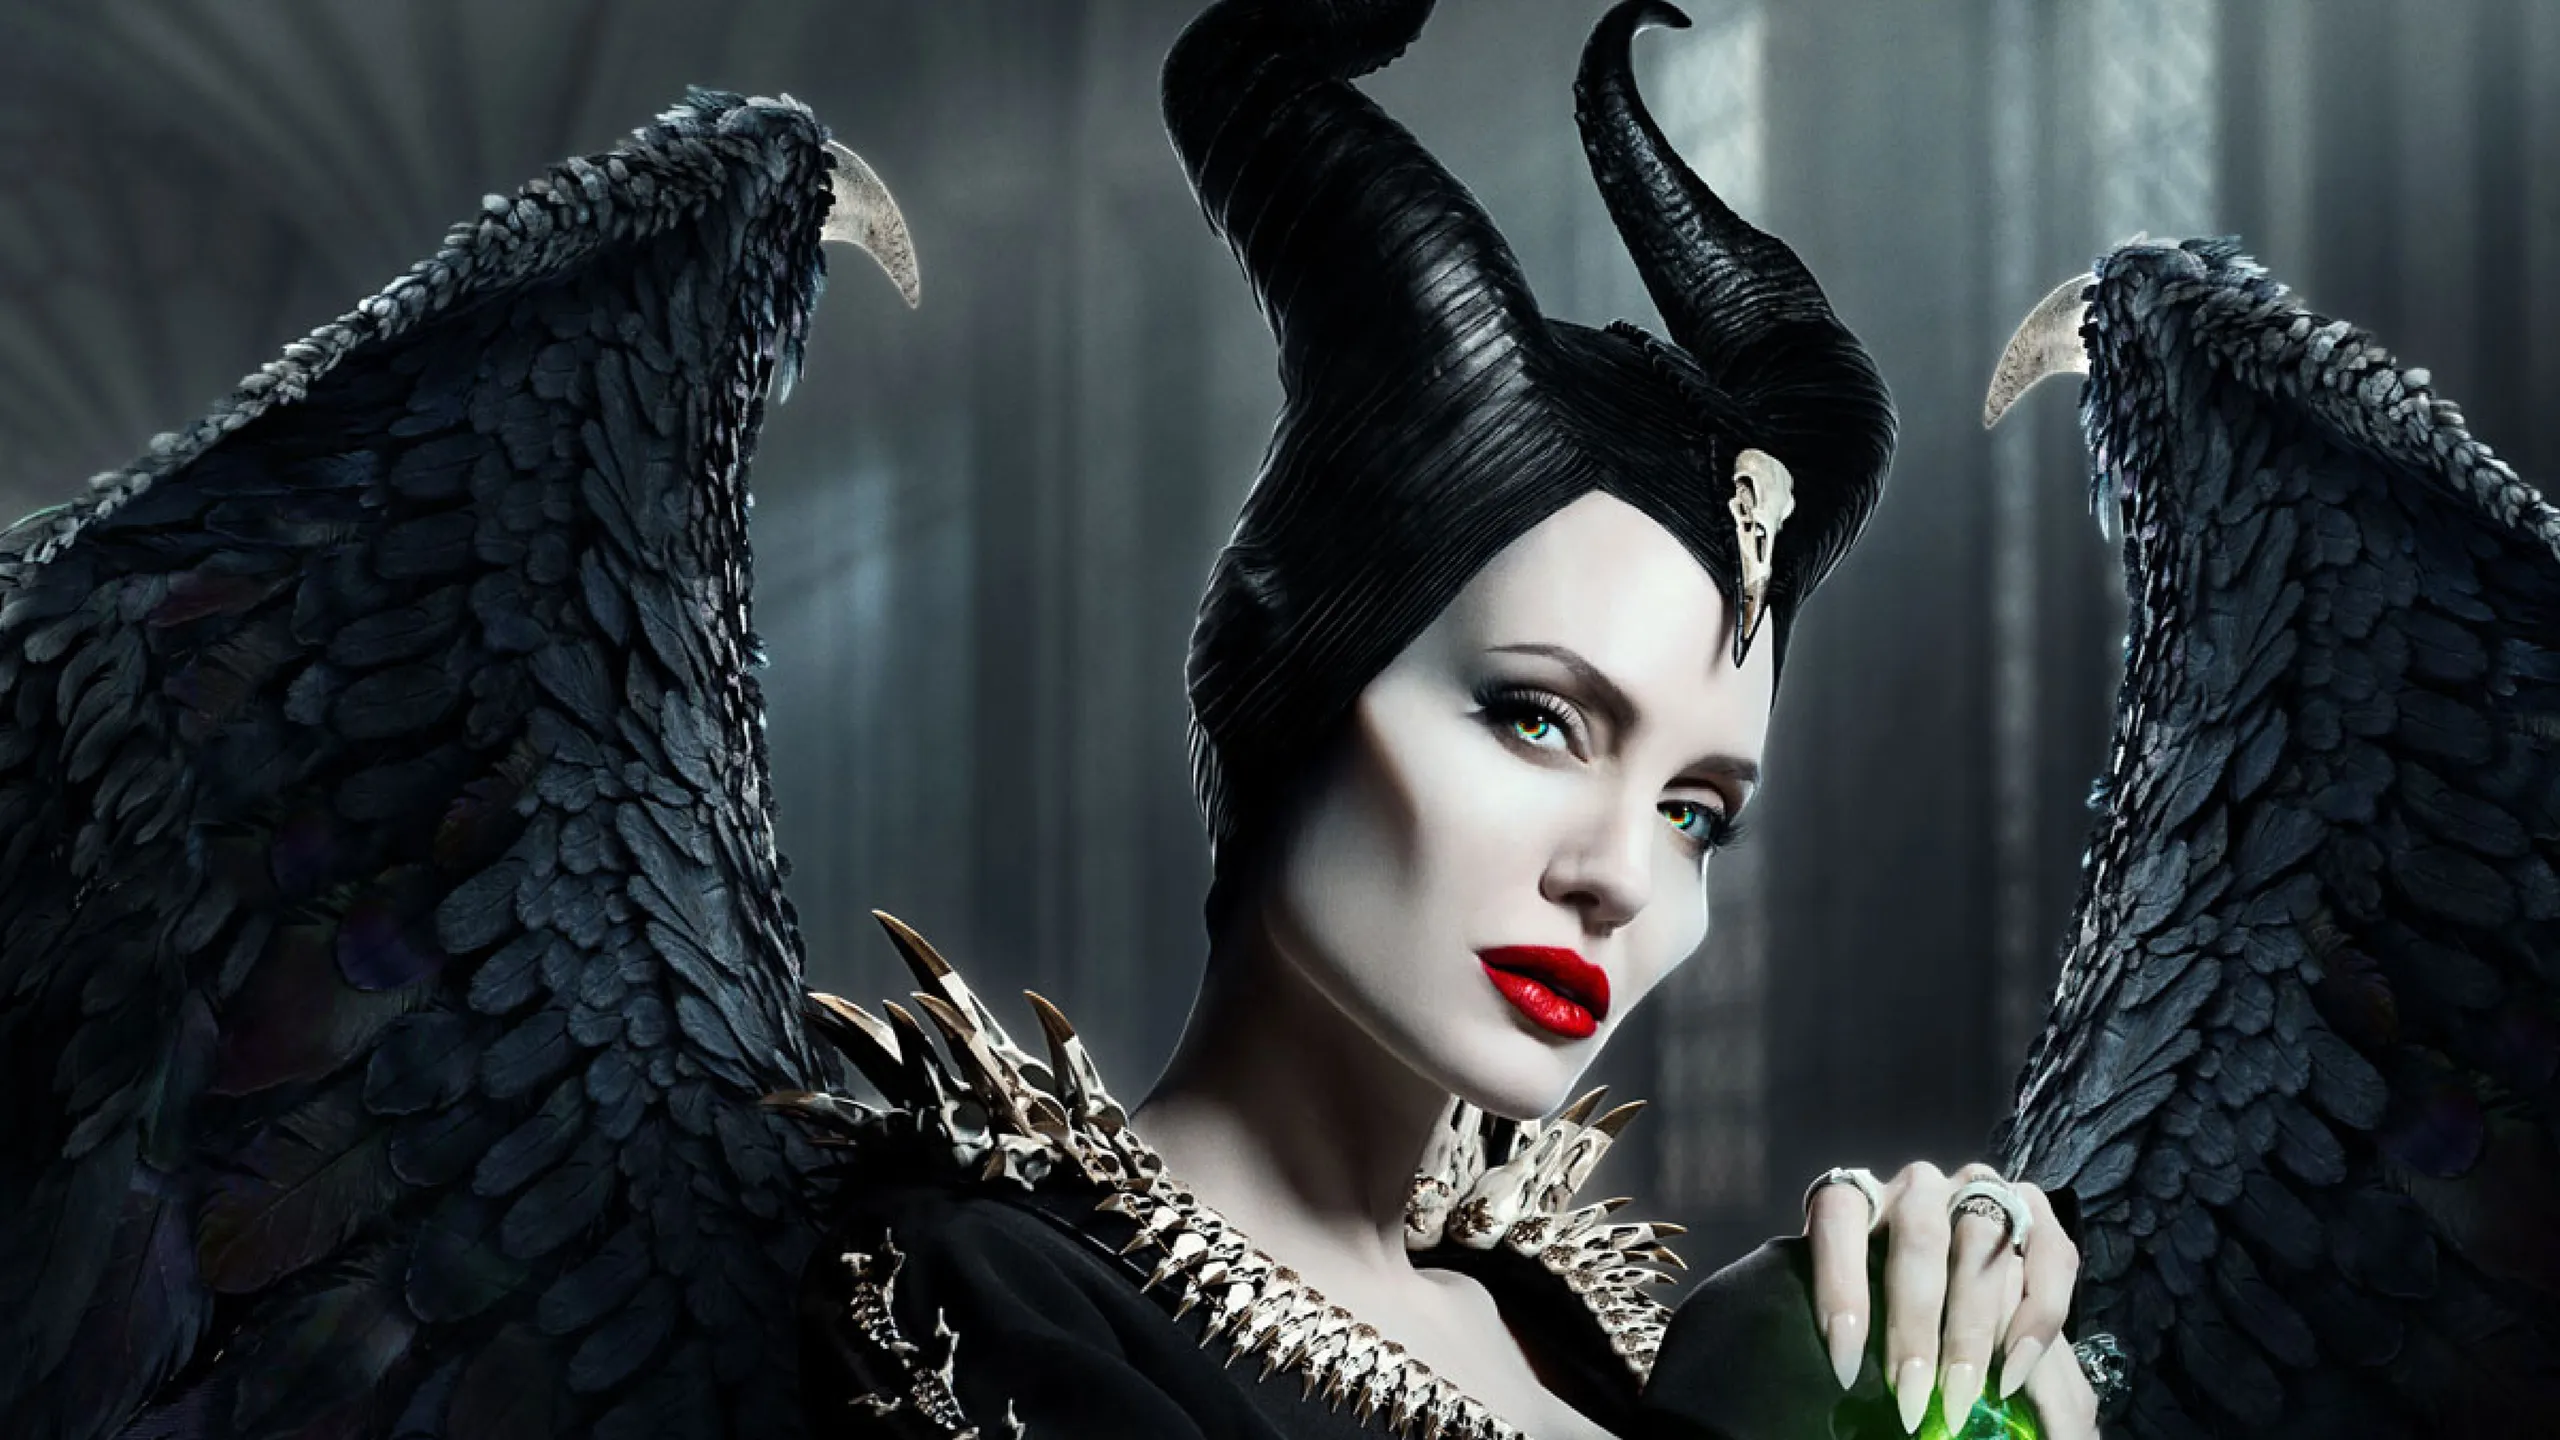 ‘Maleficent 3’ in The Works at Disney